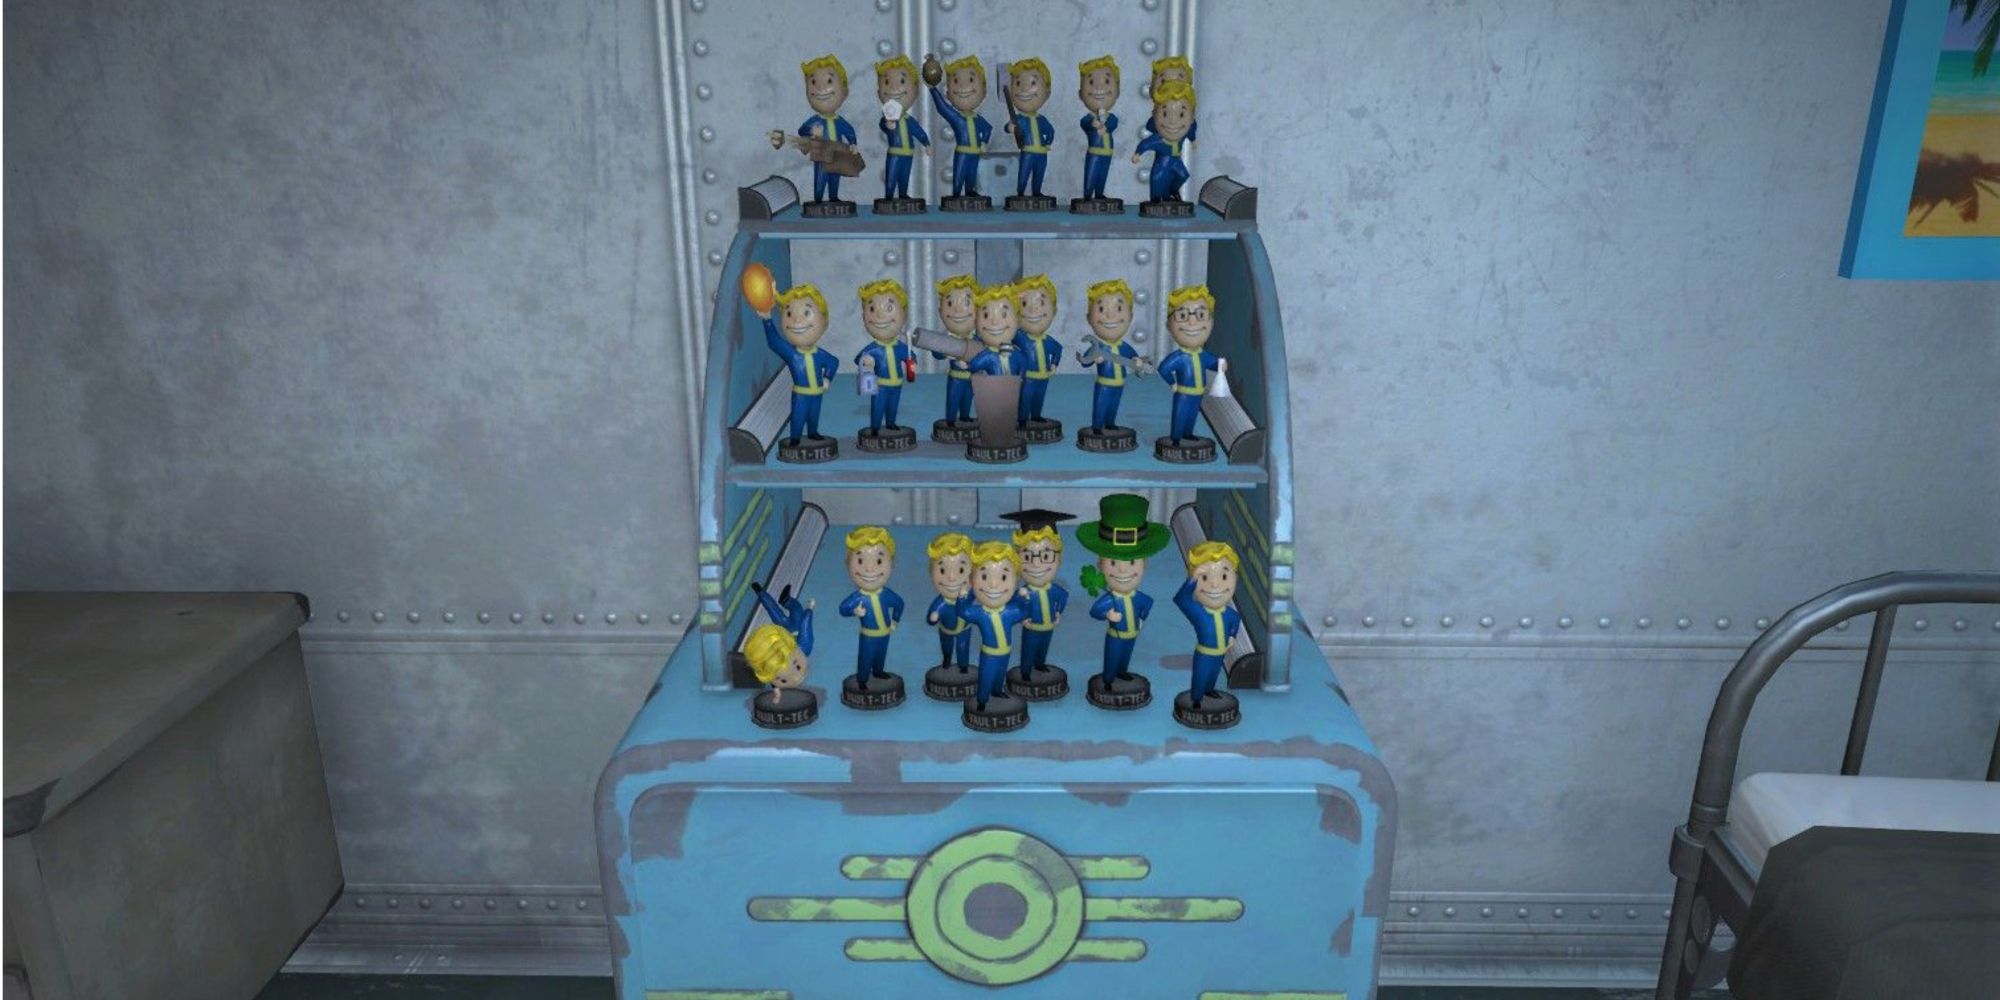 Fallout 76 Bobble Heads stacked on a display